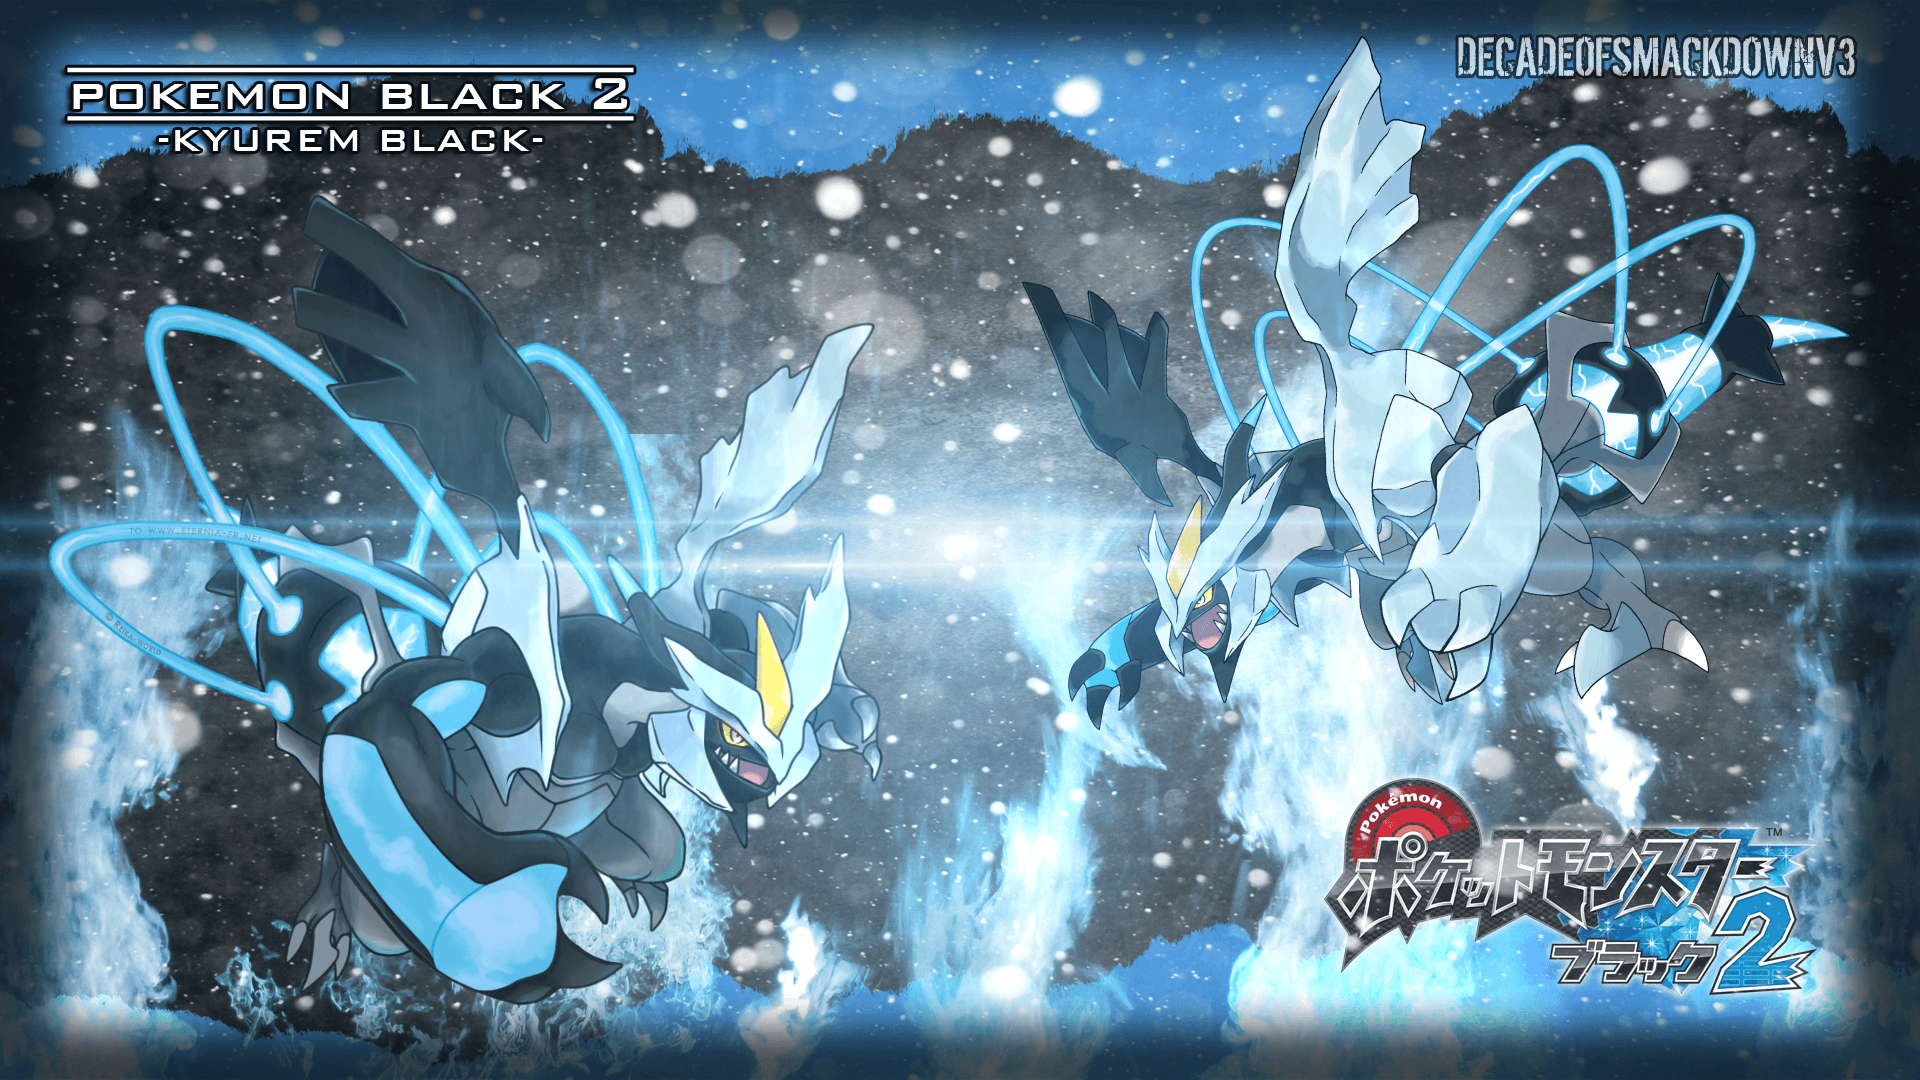 Pokemon: Black and White 2 Wallpapers